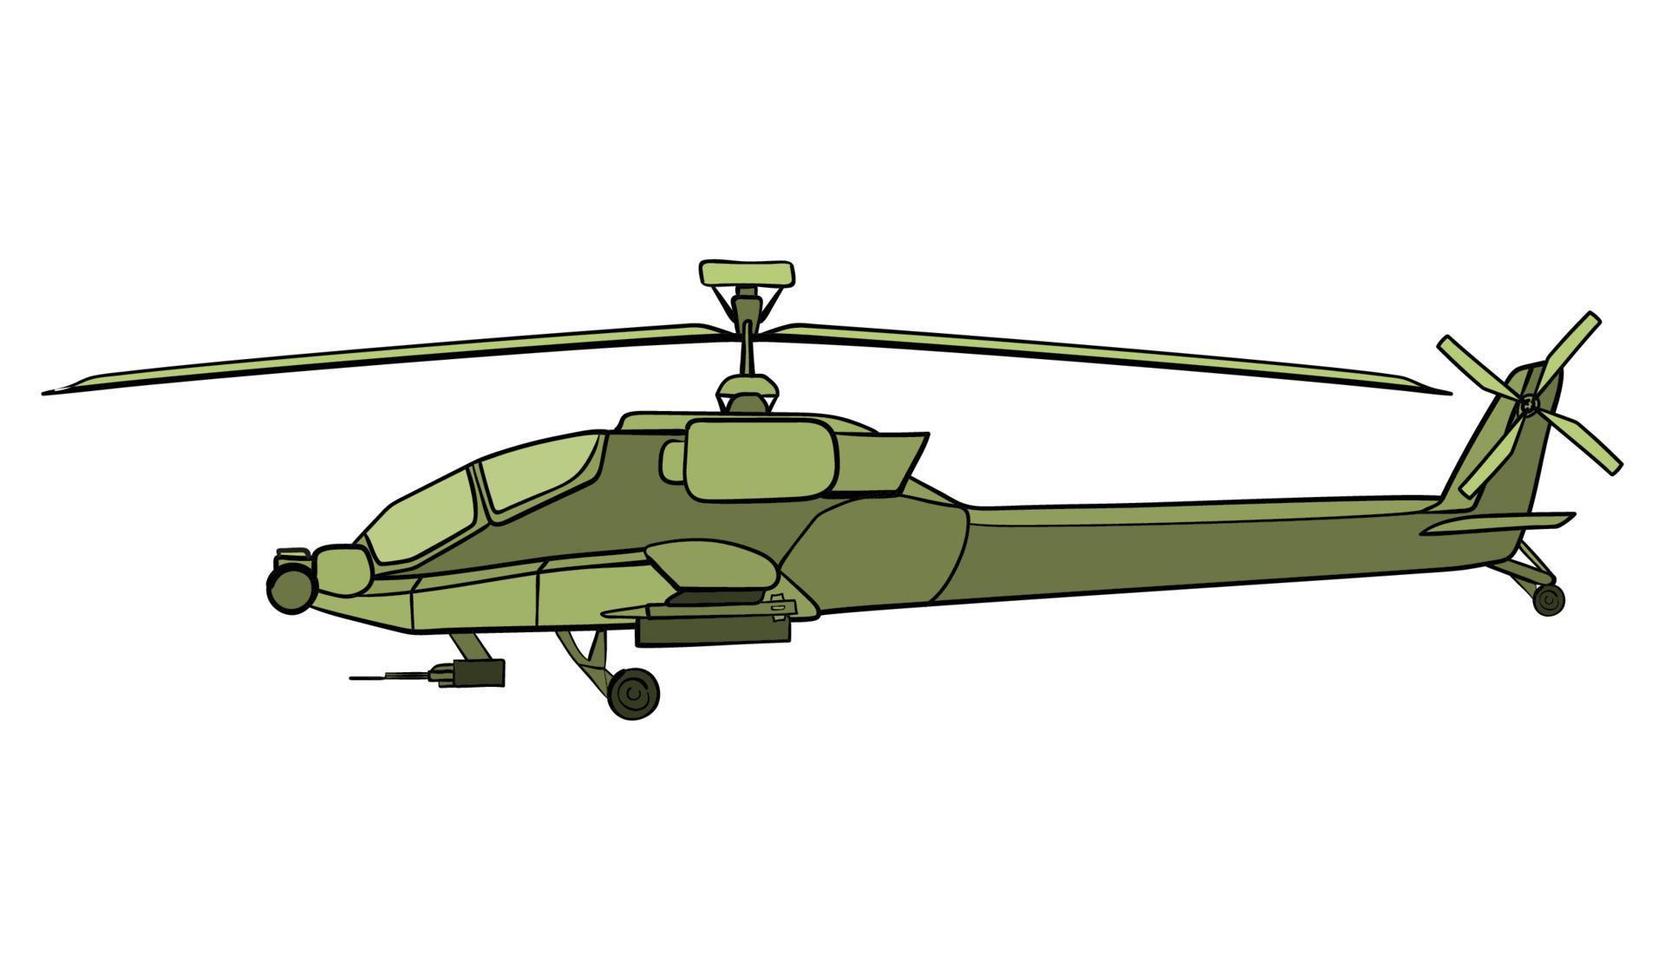 Military helicopter in flat style. Side view. Colorful vector illustration isolated on white background.